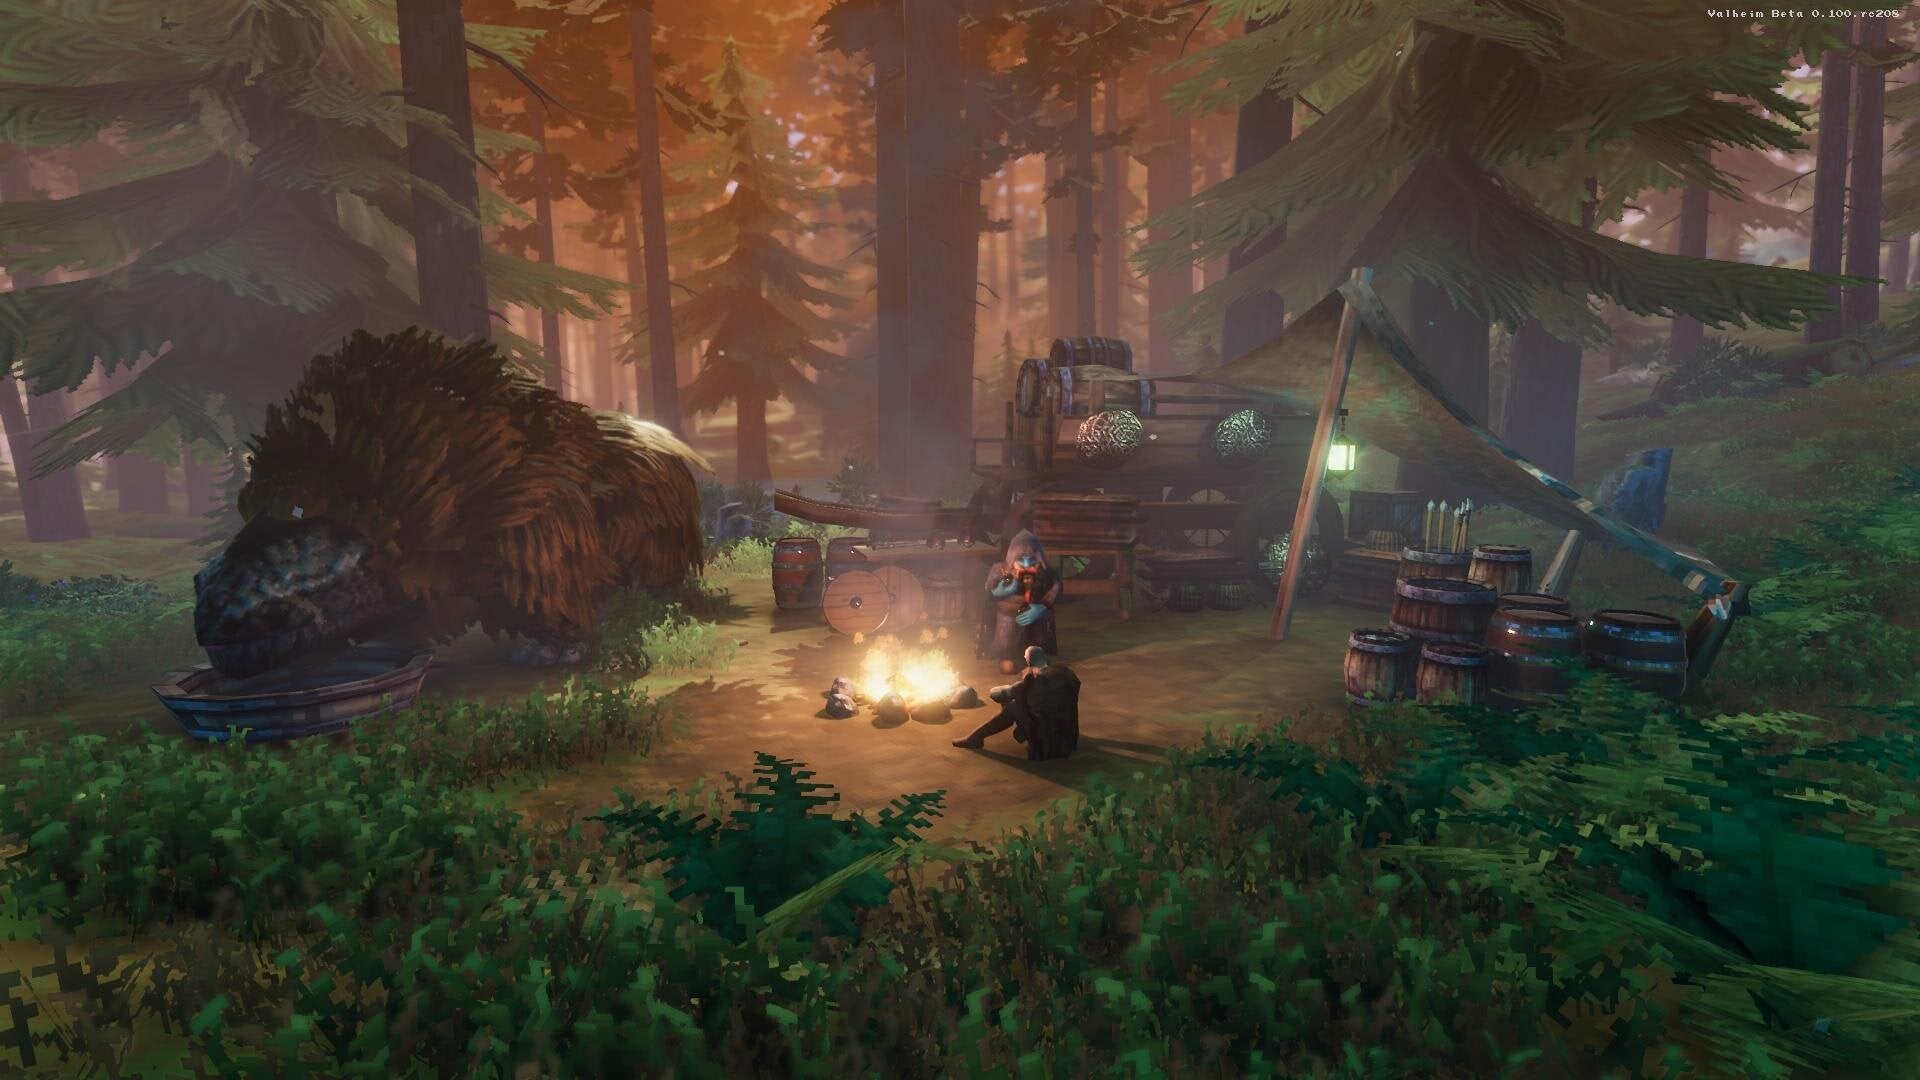 Image for Valheim: How to find Haldor the merchant, and purchase Ymir flesh